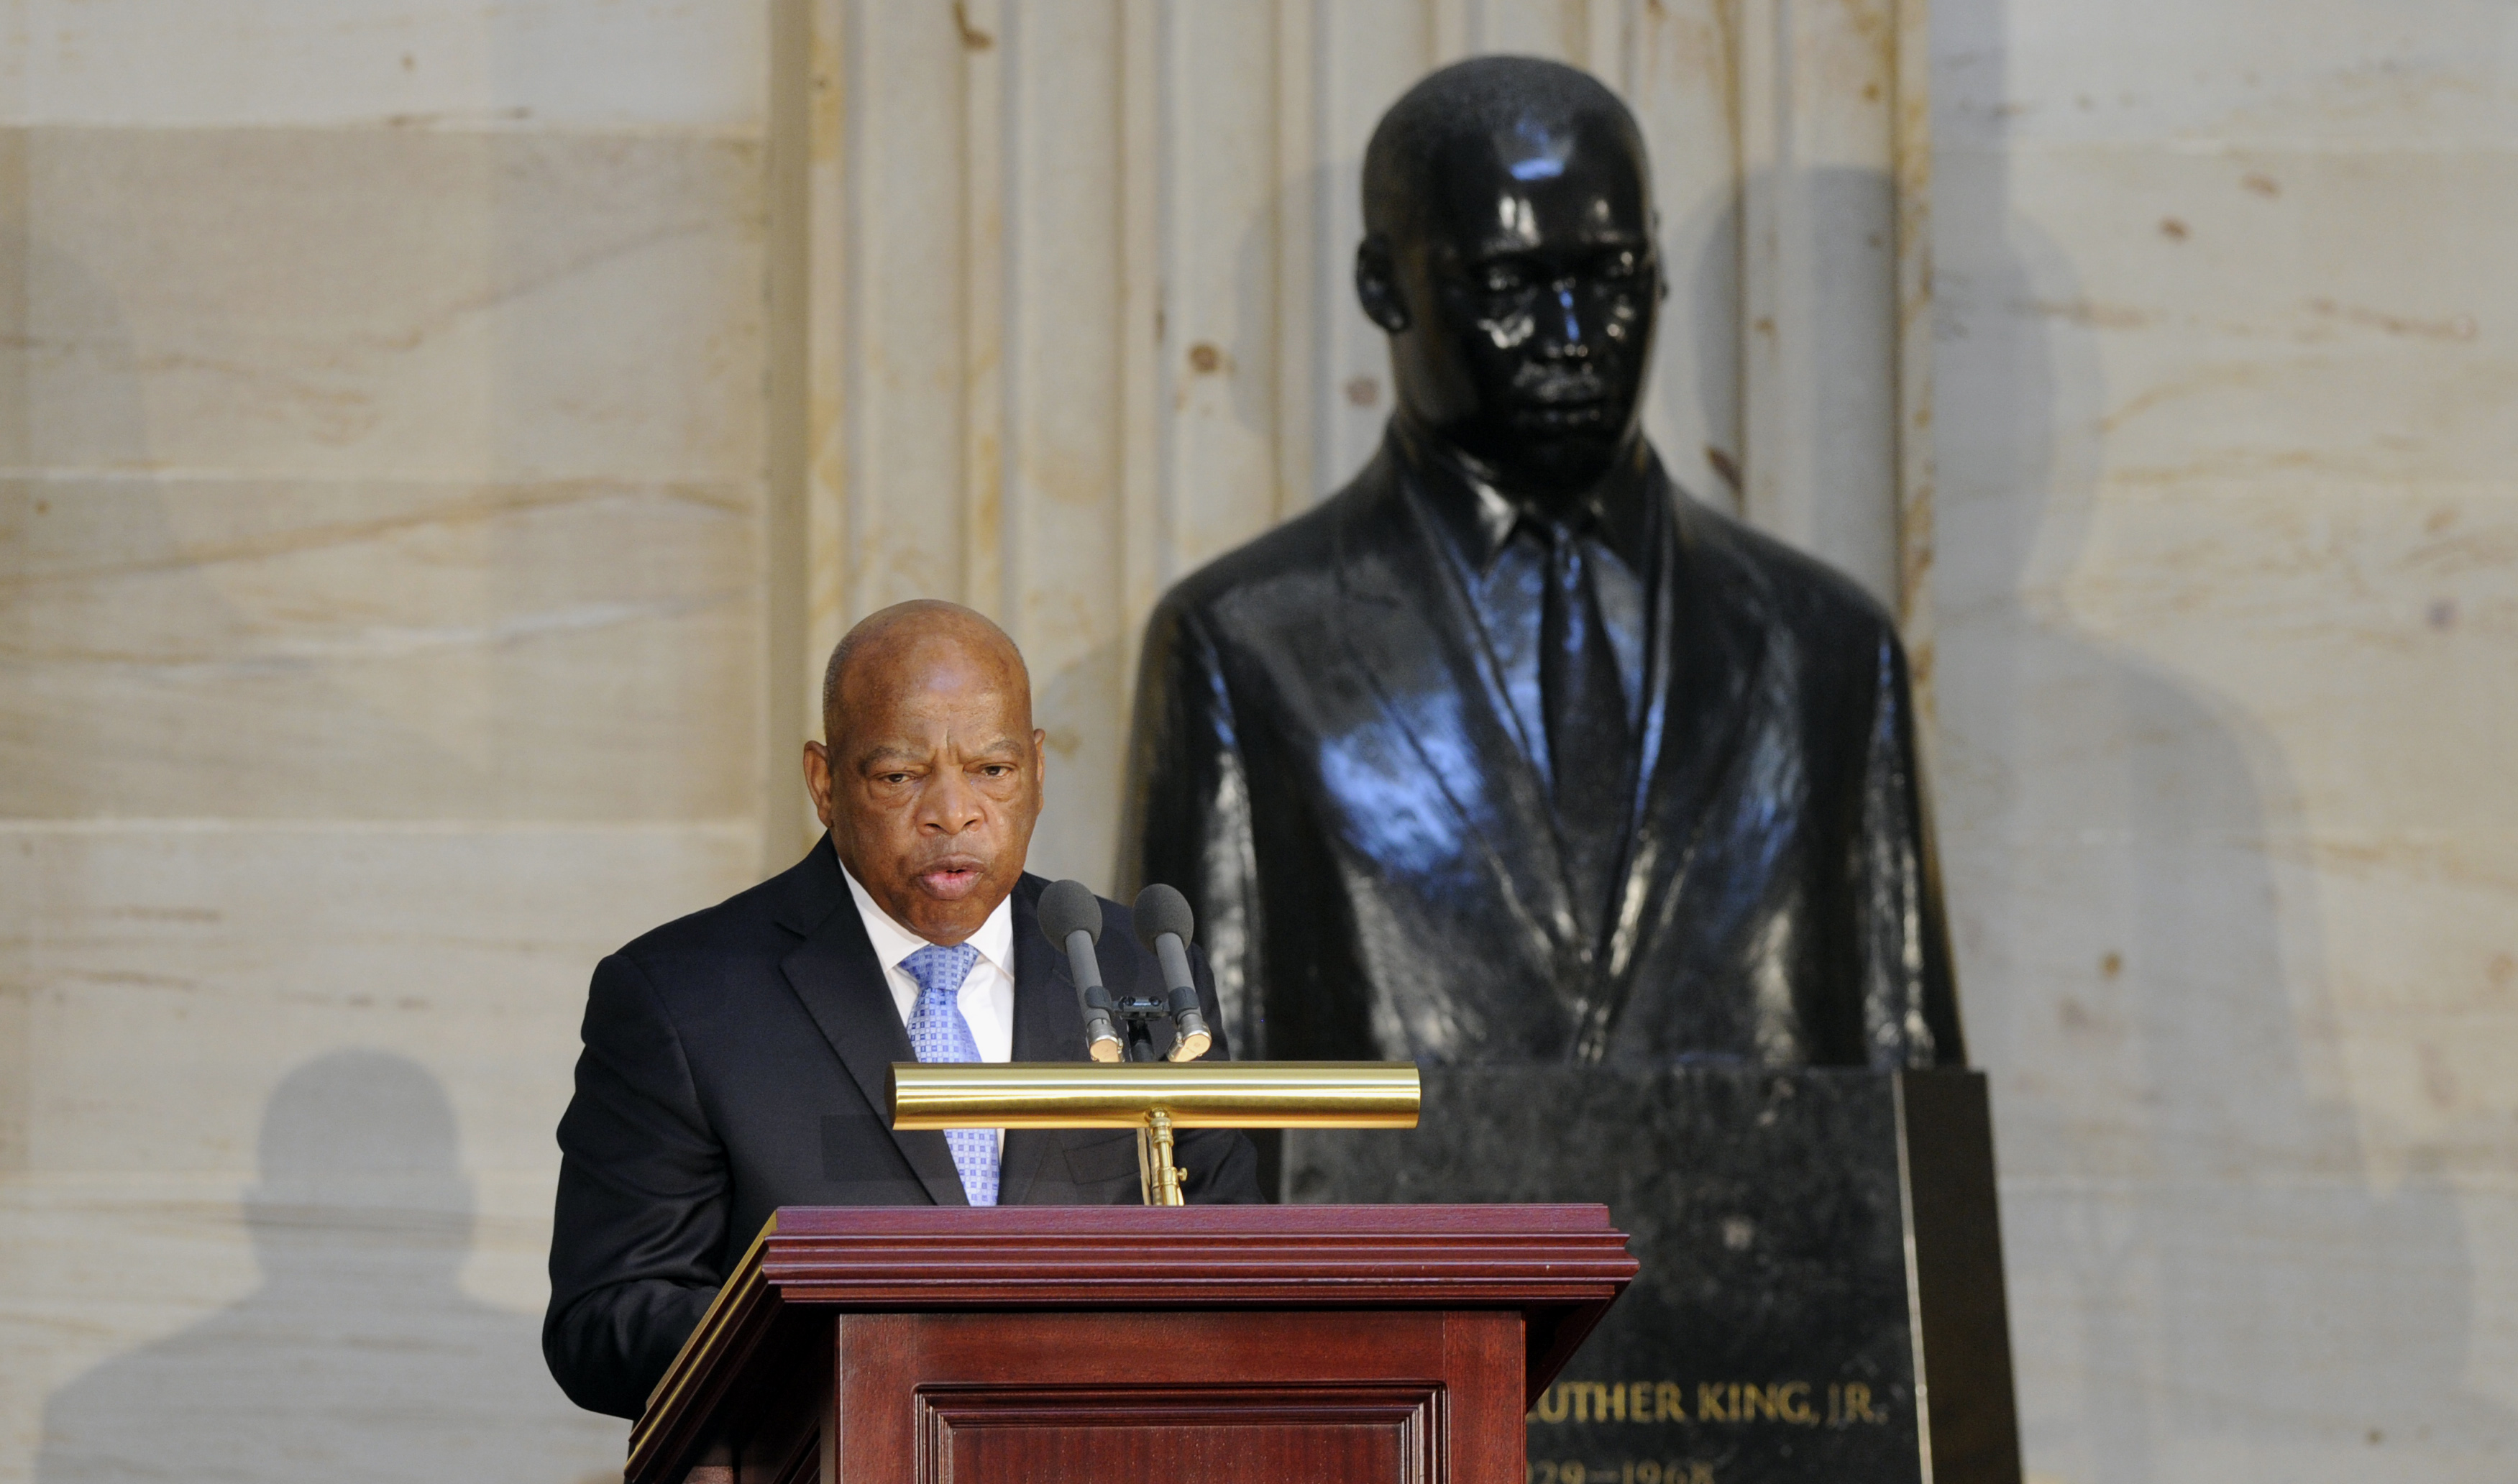 Democratic Representative John Lewis of Georgia stands in front of a statue of Martin Luther King Jr. as he speaks during the 50th anniversary ceremony for the Civil Rights Act of 1964 on Capitol Hill, in Washington, D.C., on June 24, 2014 (Susan Walsh—AP)